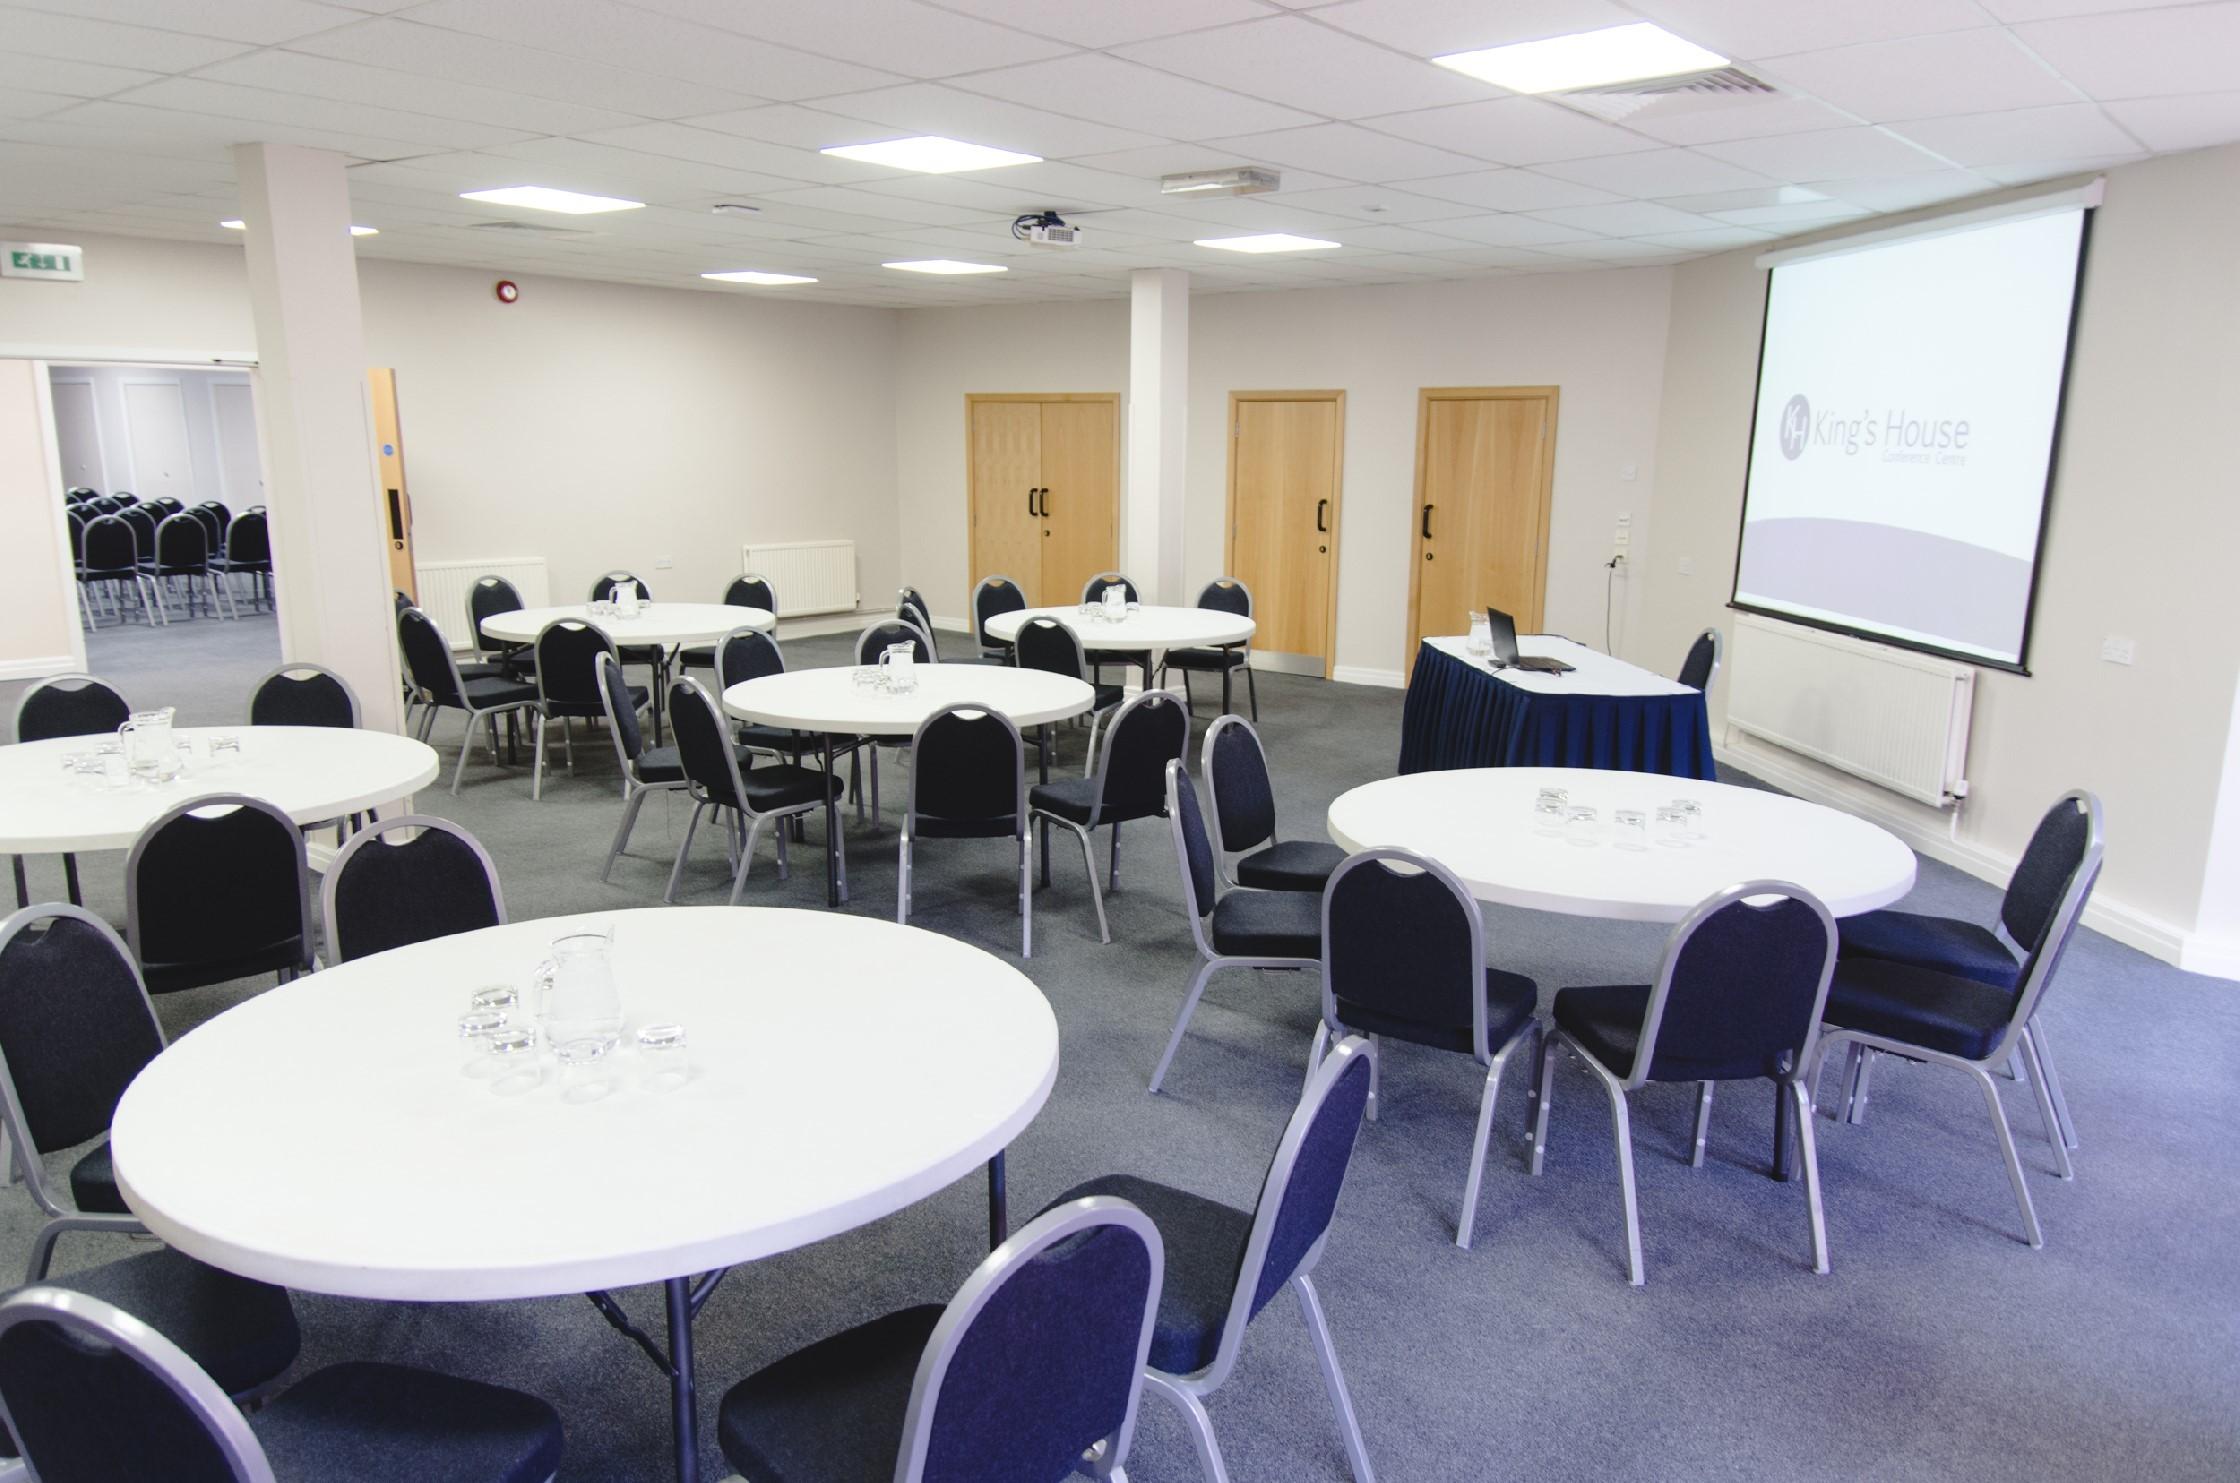 King's House Conference Centre, Seminar Room 1 photo #3